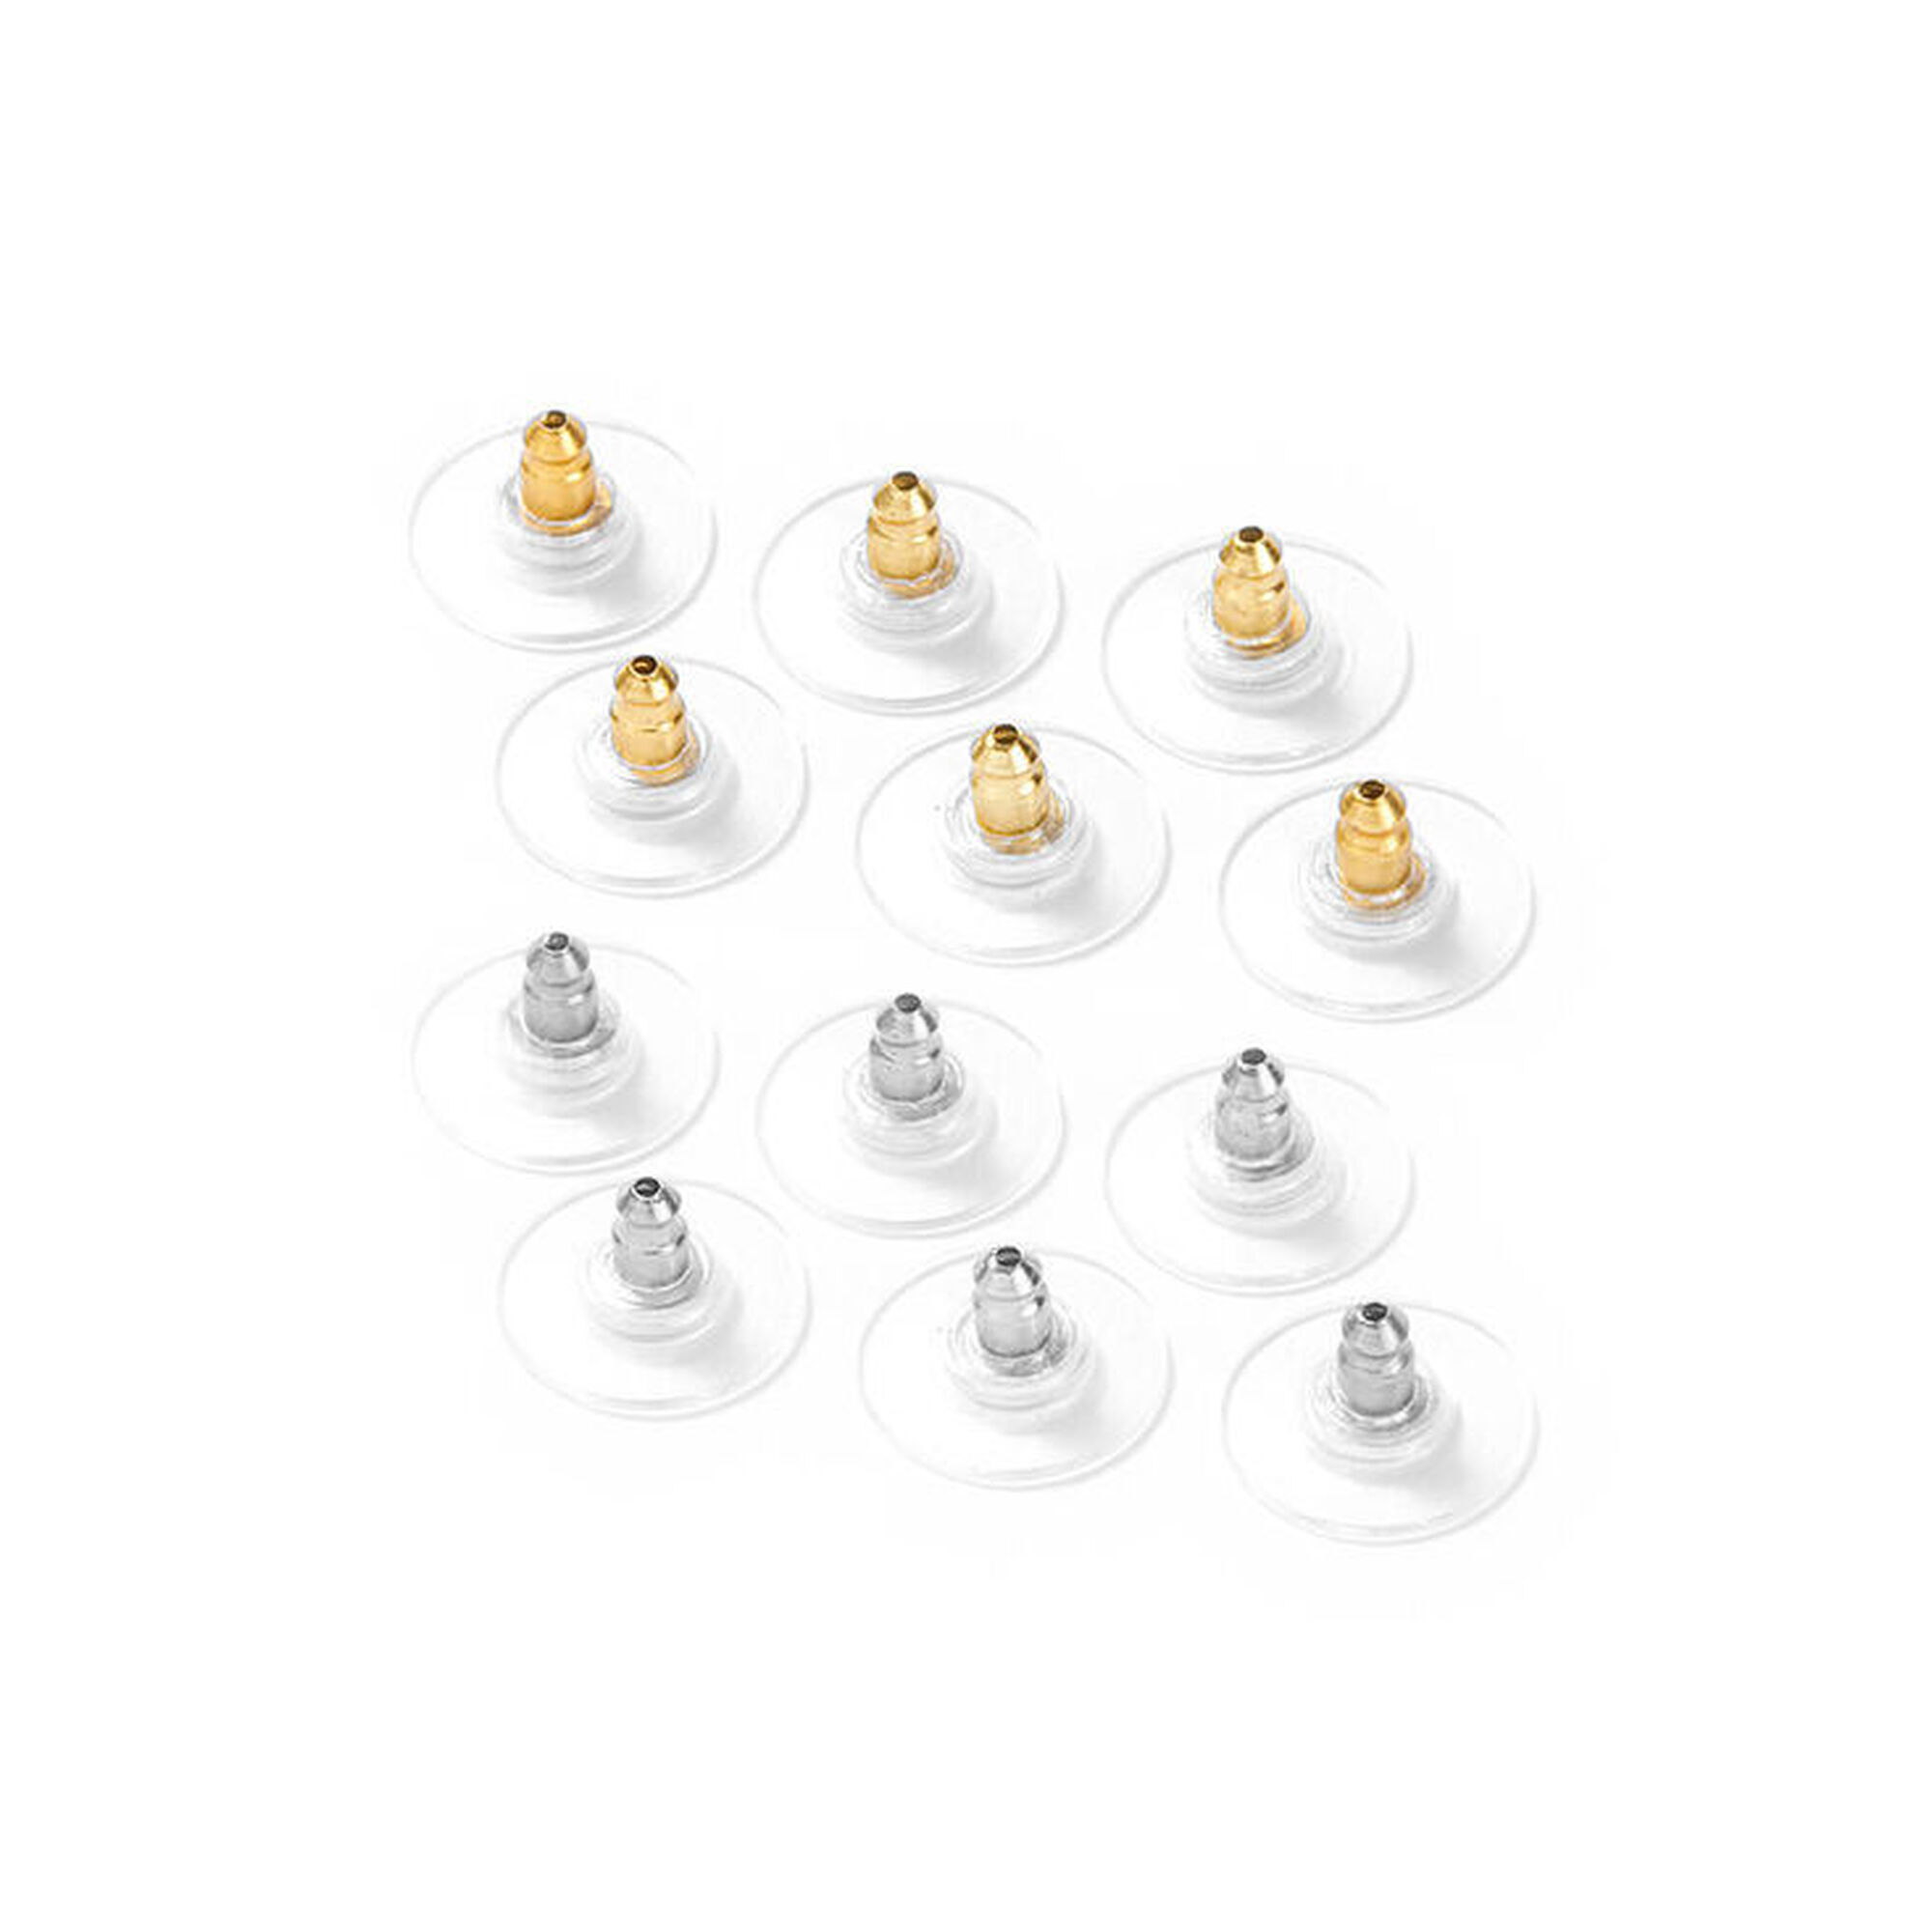 Spare Earring Parts and Earring Back Replacements, Claire's UK